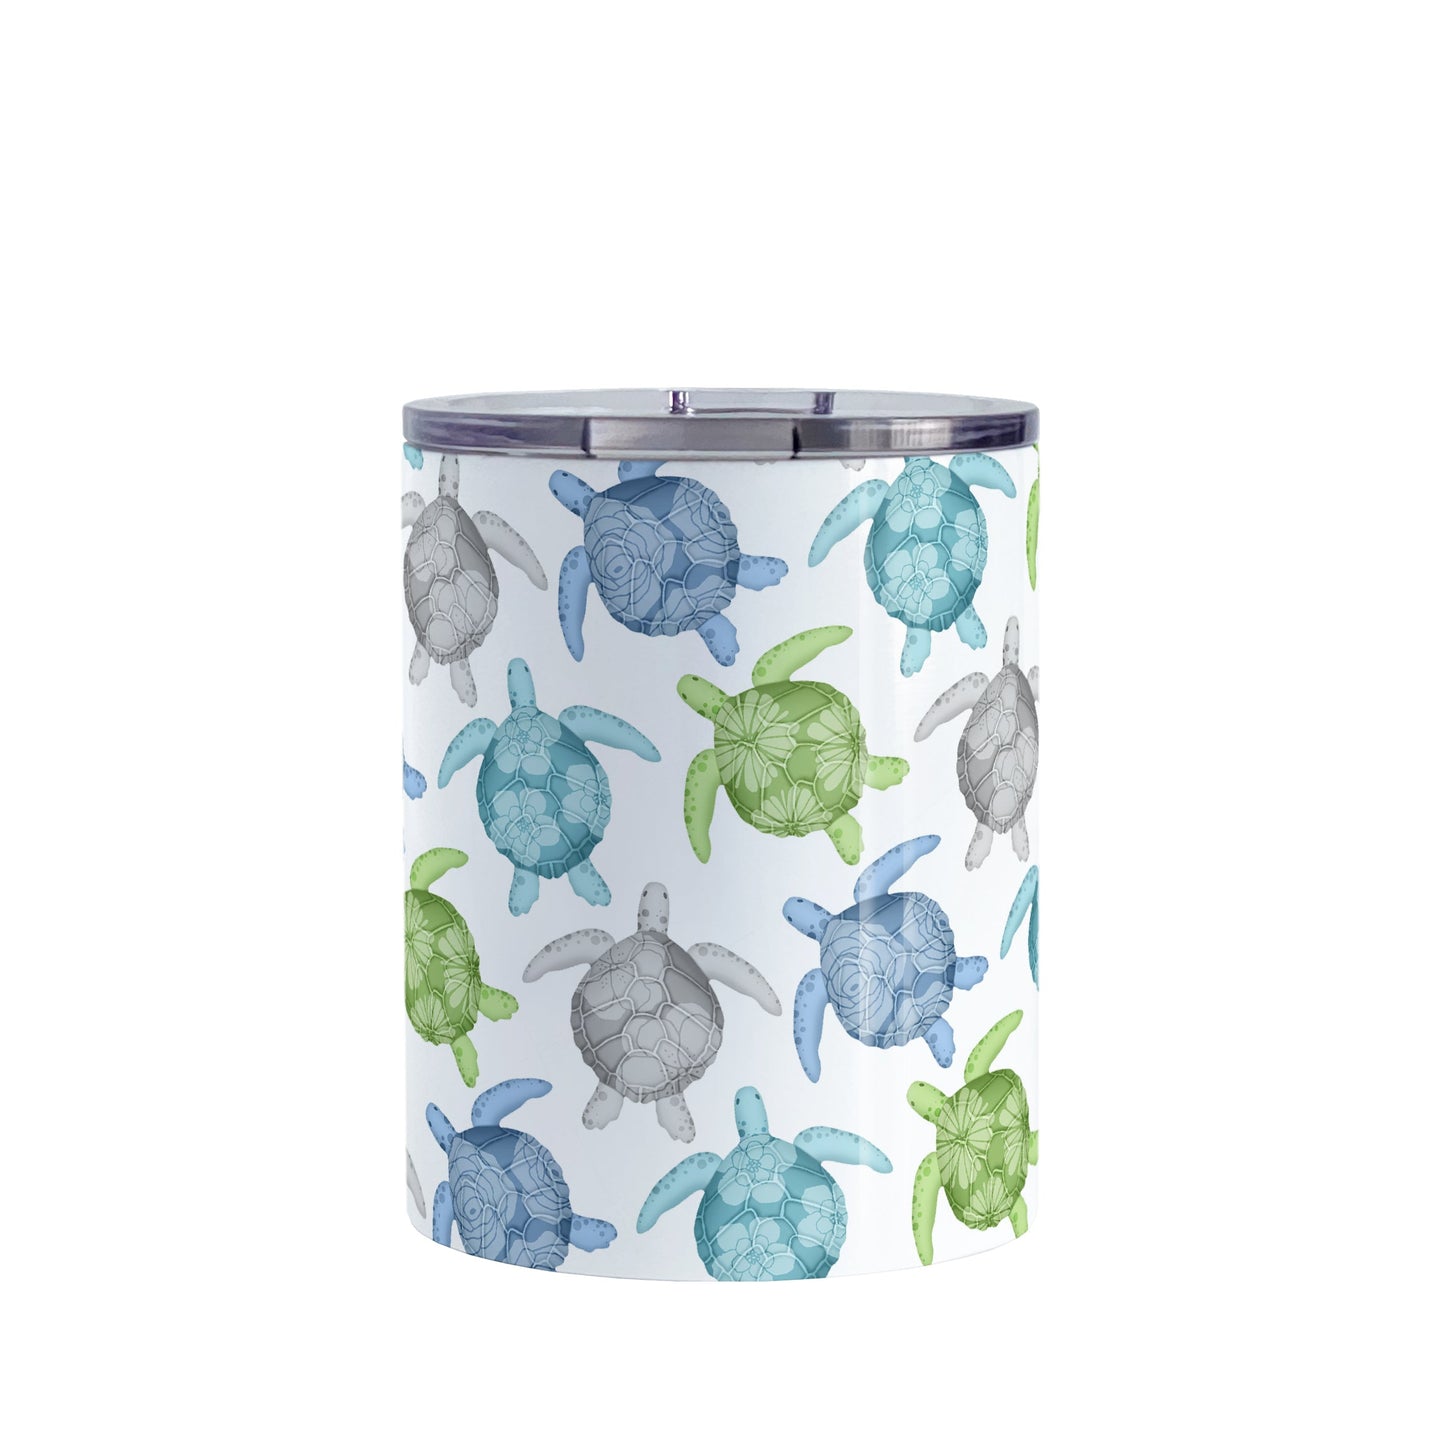 Cool Sea Turtles Pattern Tumbler Cup (10oz, stainless steel insulated) at Amy's Coffee Mugs. A tumbler cup with a pattern of sea turtles in a cool color palette of blue, green, turquoise and gray that wraps around the cup. Each cool colored sea turtle has a different floral watermark over its shell.